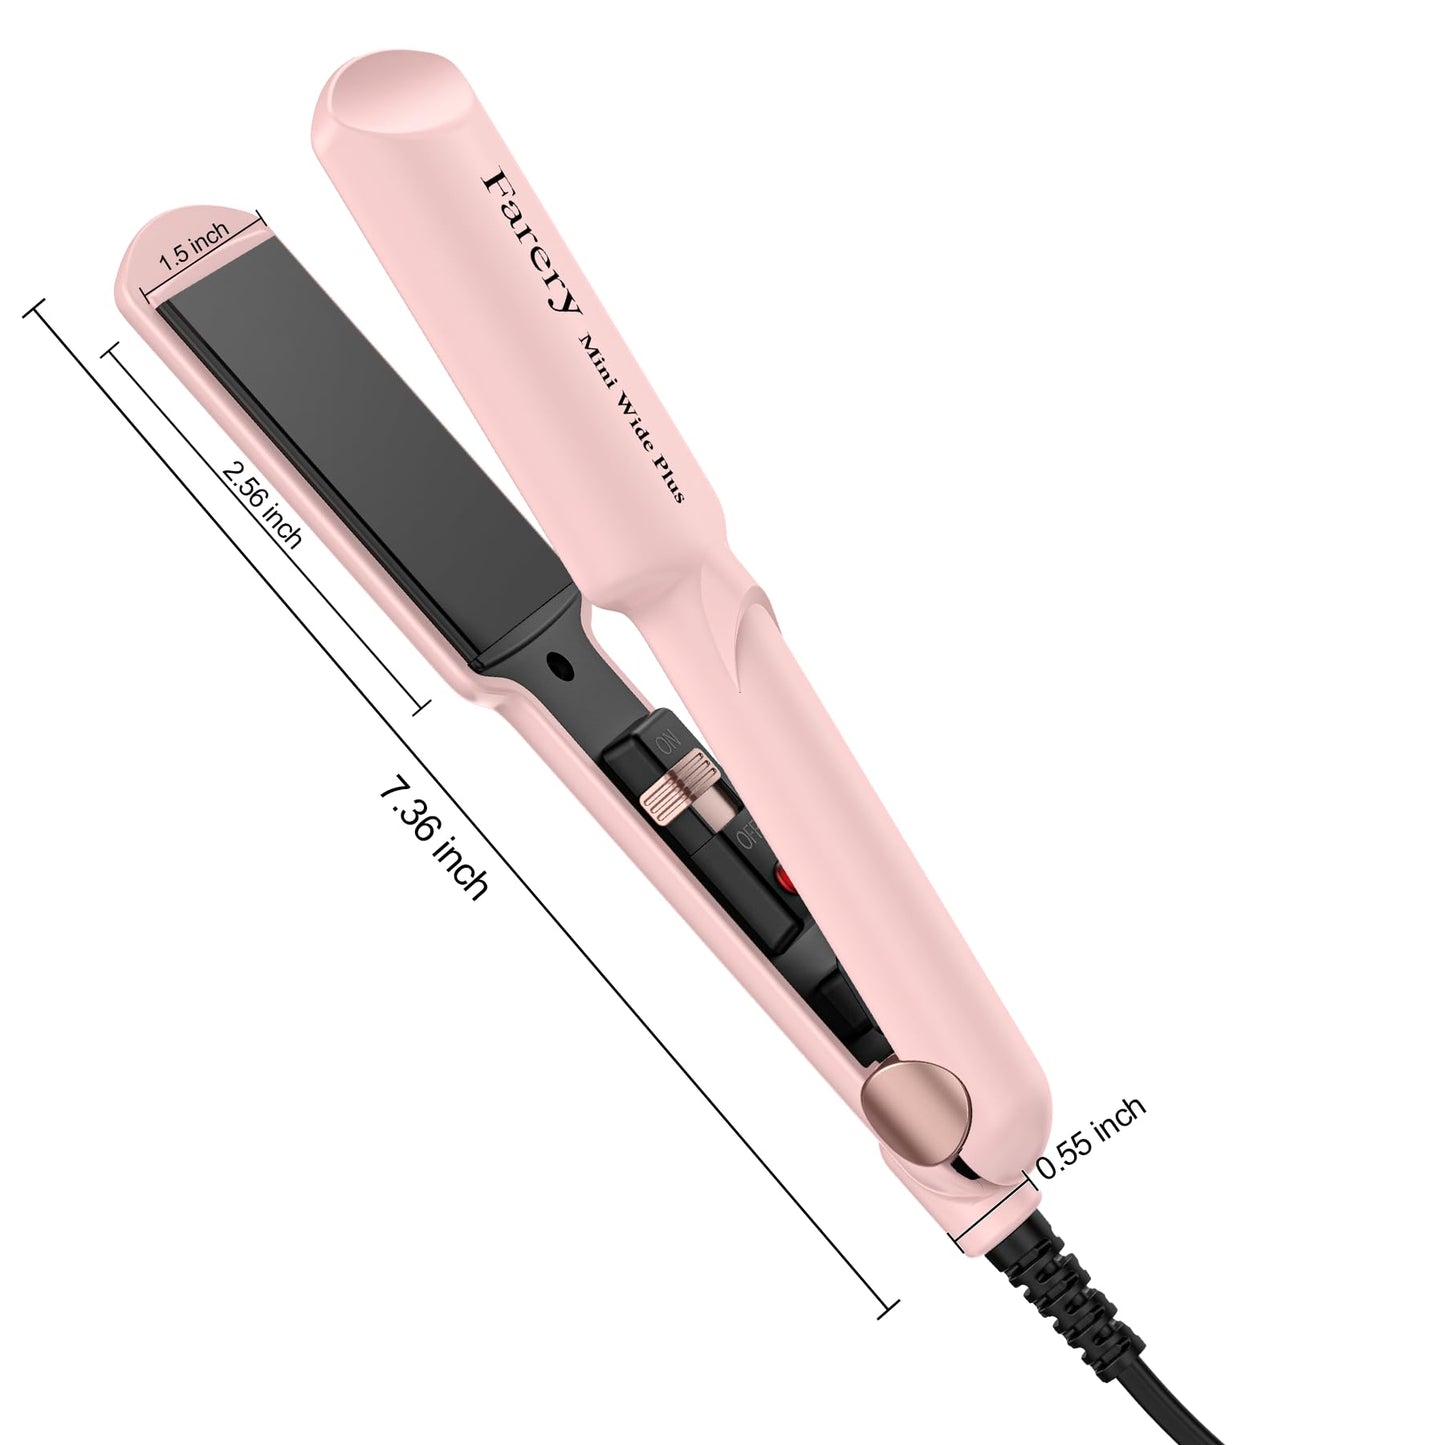 FARERY Mini Flat Iron Travel Size, 1.5 Inch Ceramic Mini Hair Straightener, Small Flat Iron for Short to Medium Hair, Portable Hair Straightener with Dual Voltage and Storage Bag